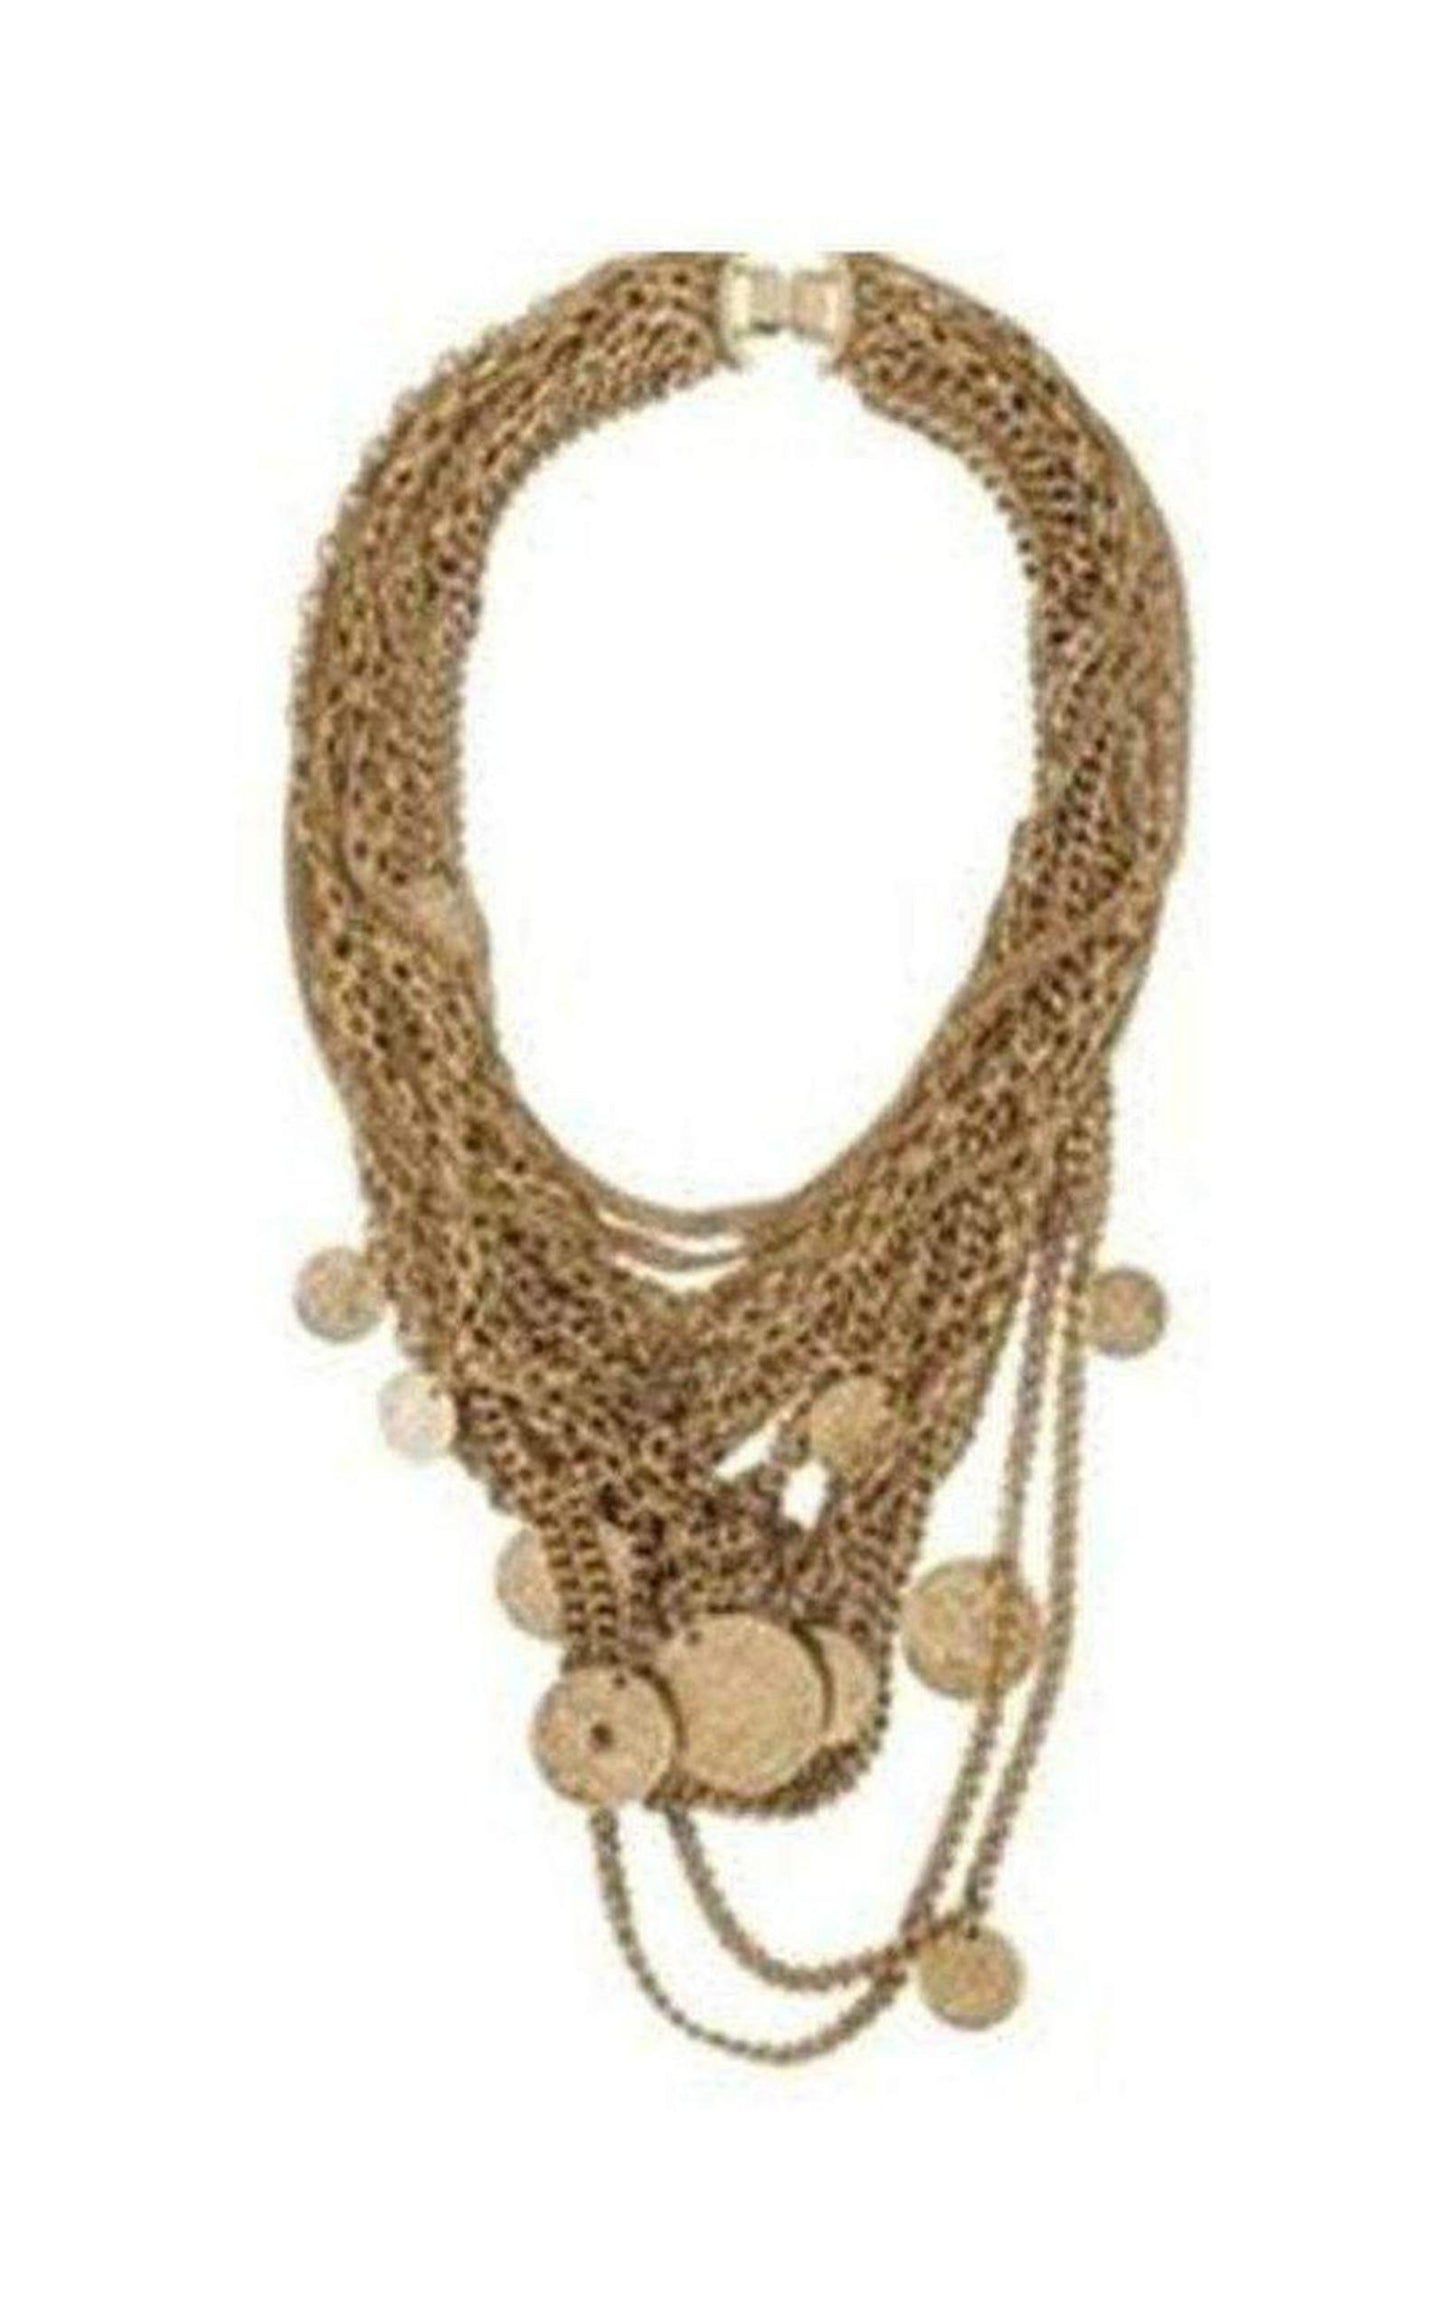 Multilayered Antique Coin Necklace